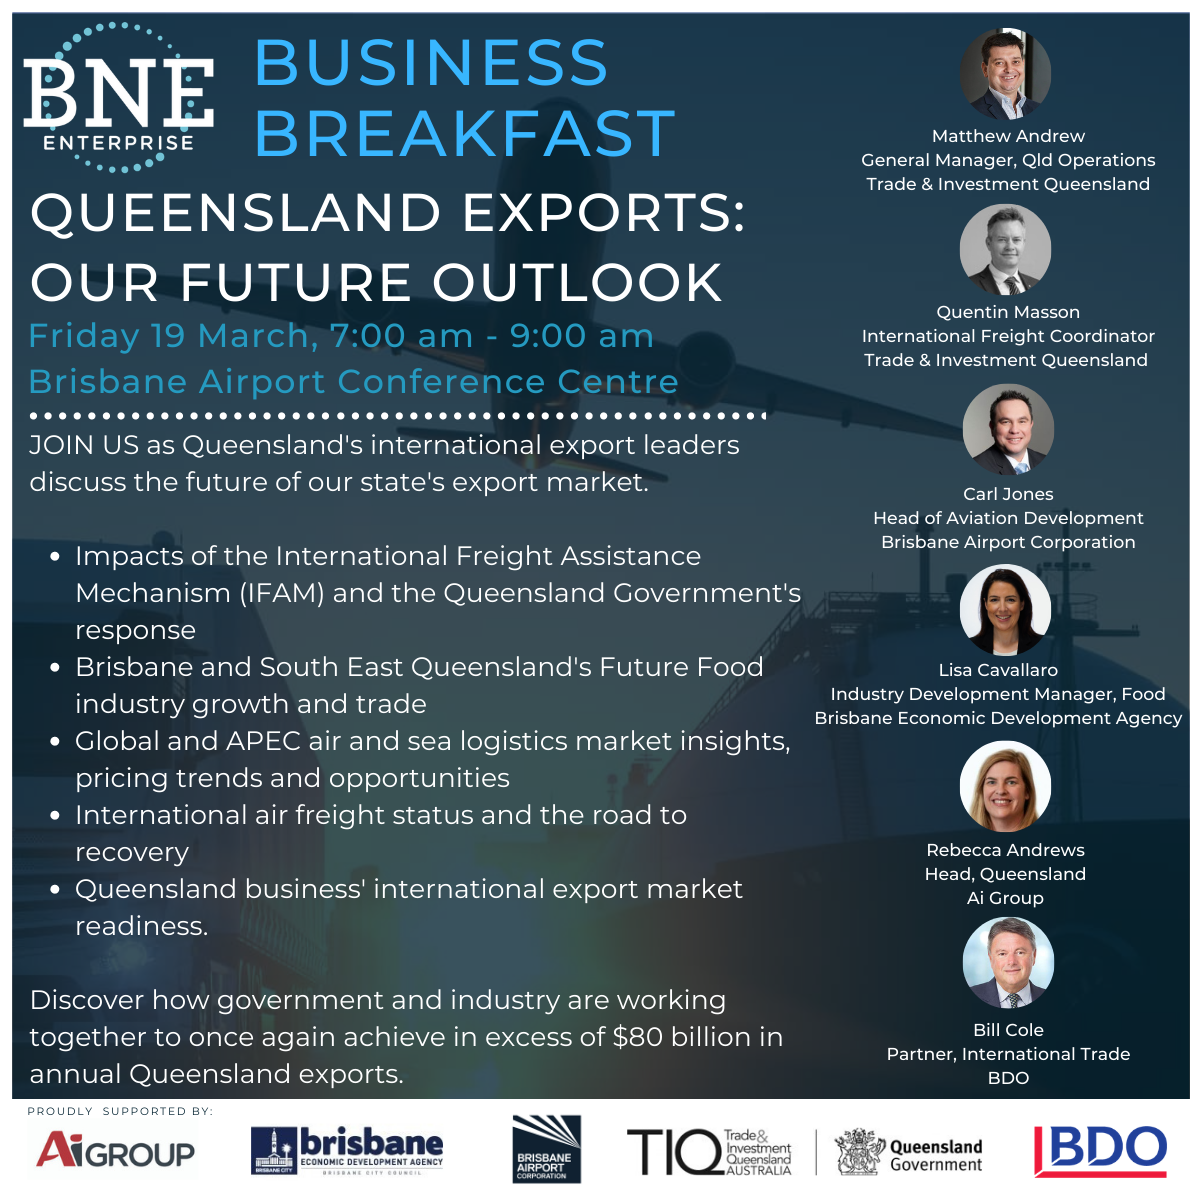 BNE Enterprise Business Breakfast – Queensland Exports: Our Future Outlook